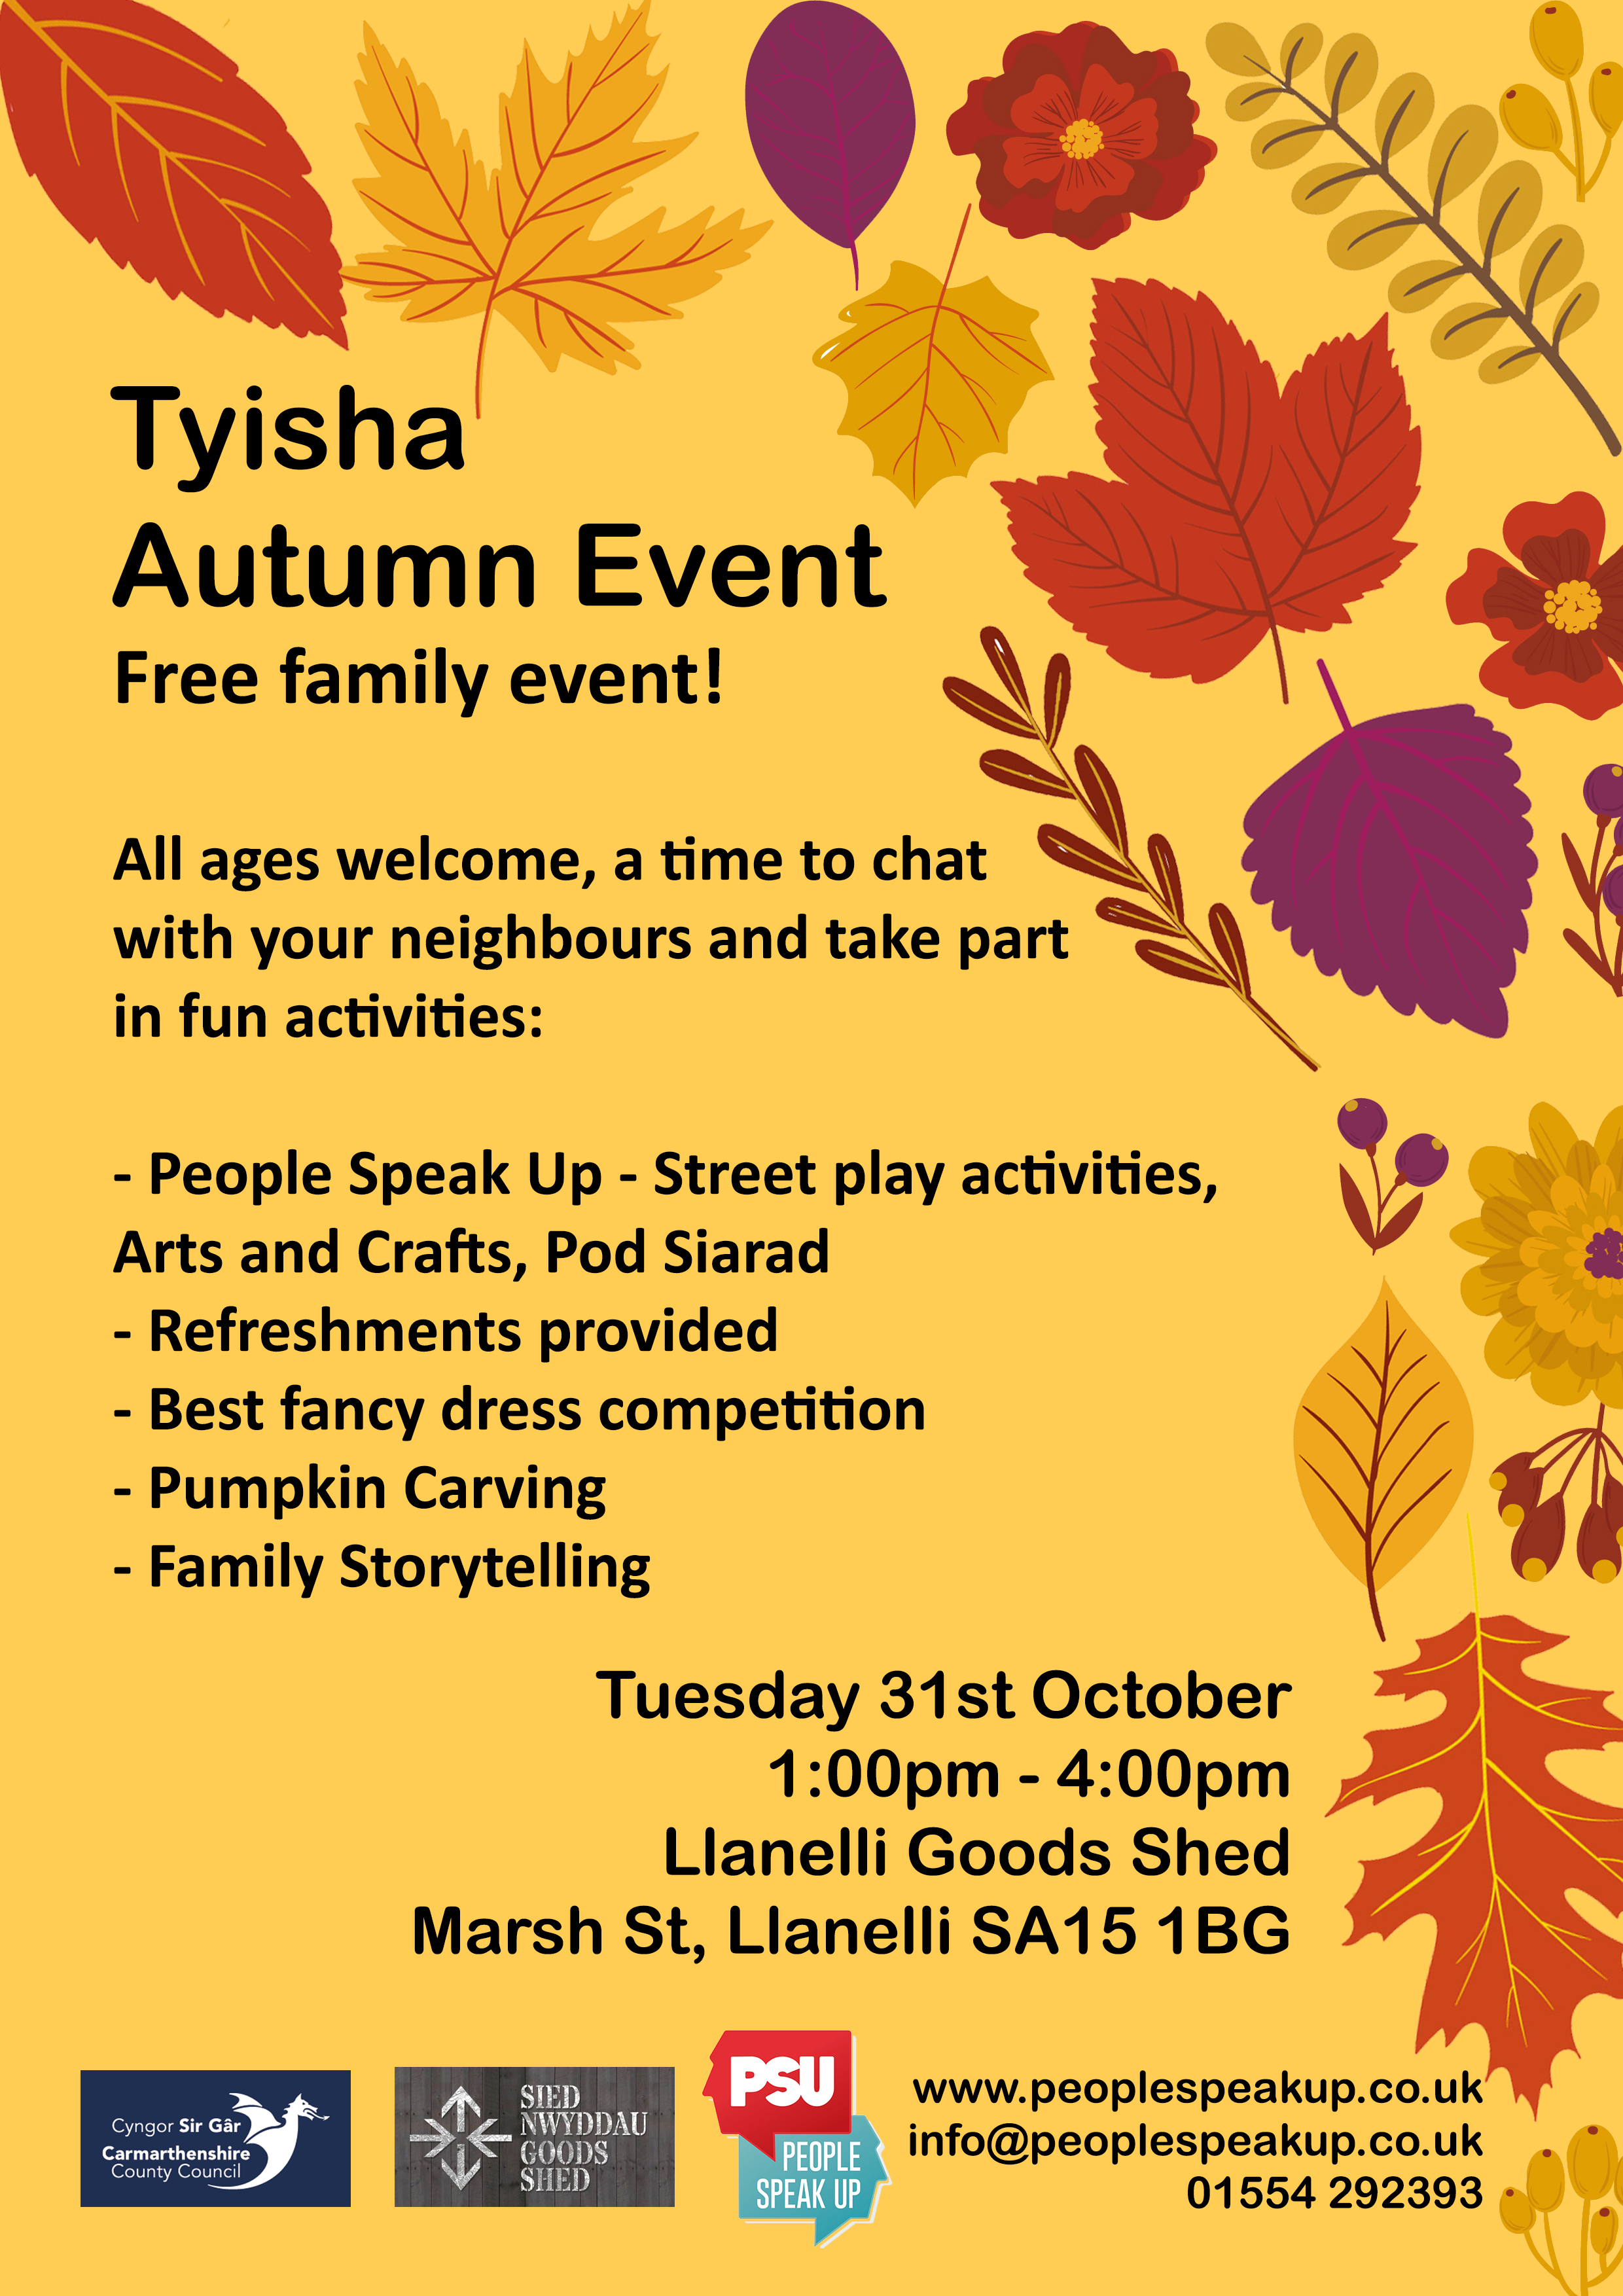 Tyisha Autumn Event at Llanelli Goods Shed 31st October at 1pm